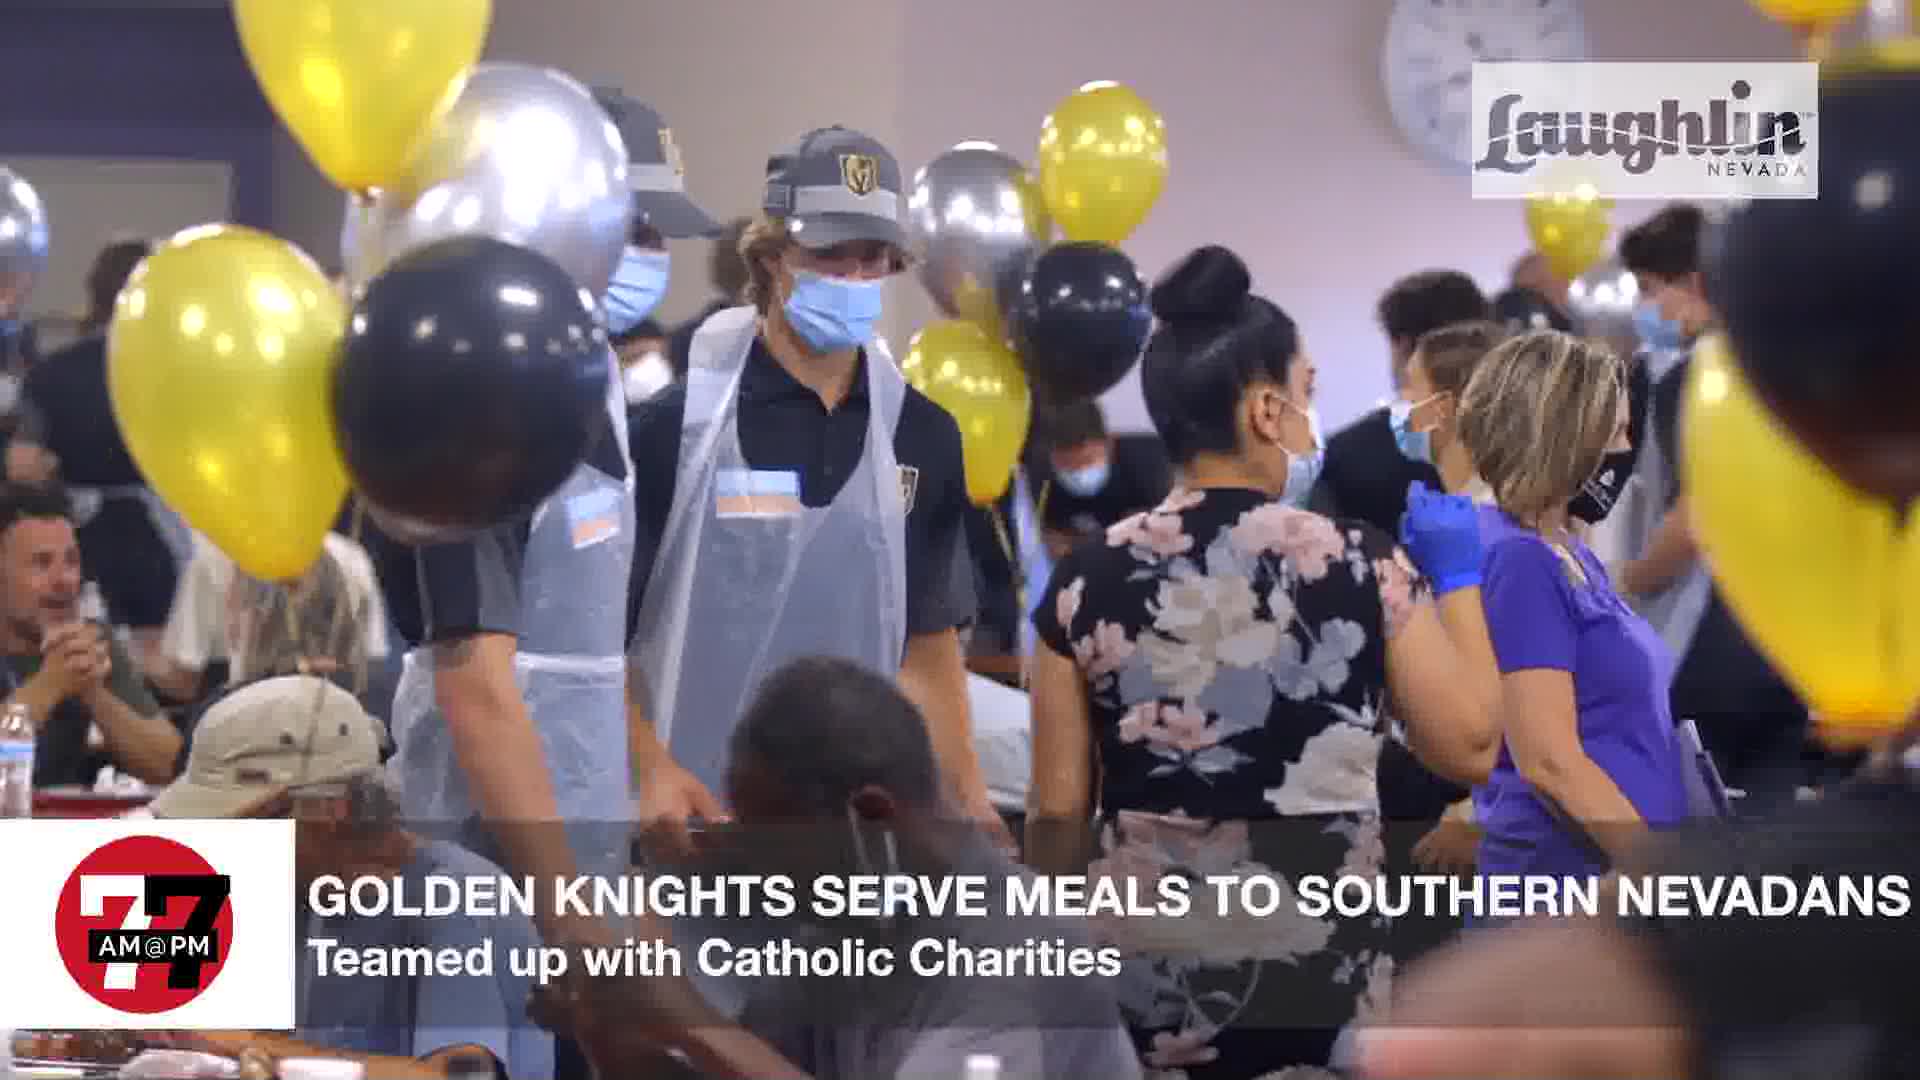 Golden Knights Development camp participants team up with Catholic Charities